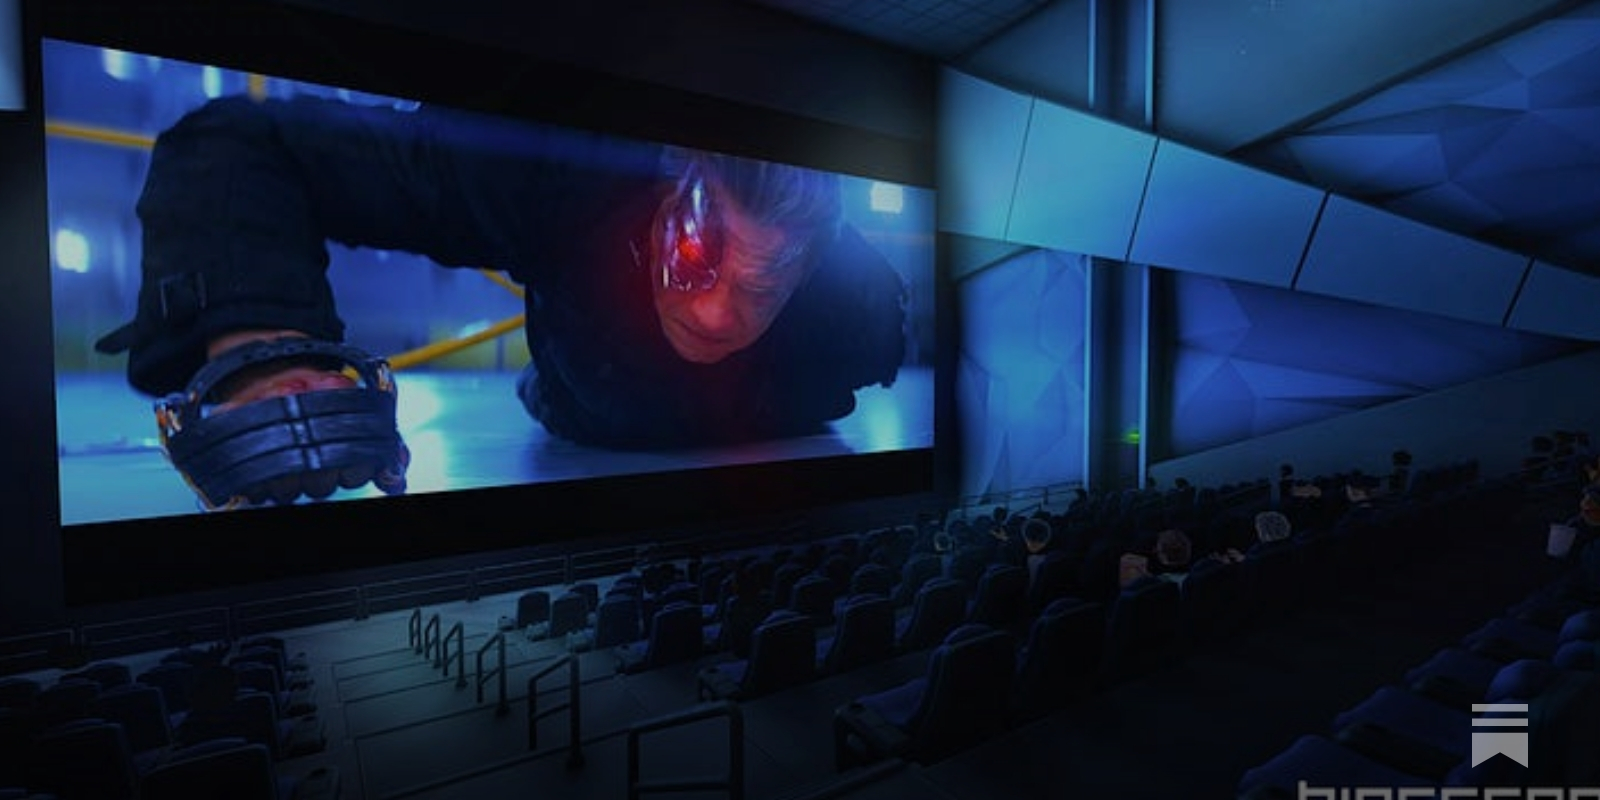 What is next for the moviegoing experience in the age of VR, spatial computing and streaming?